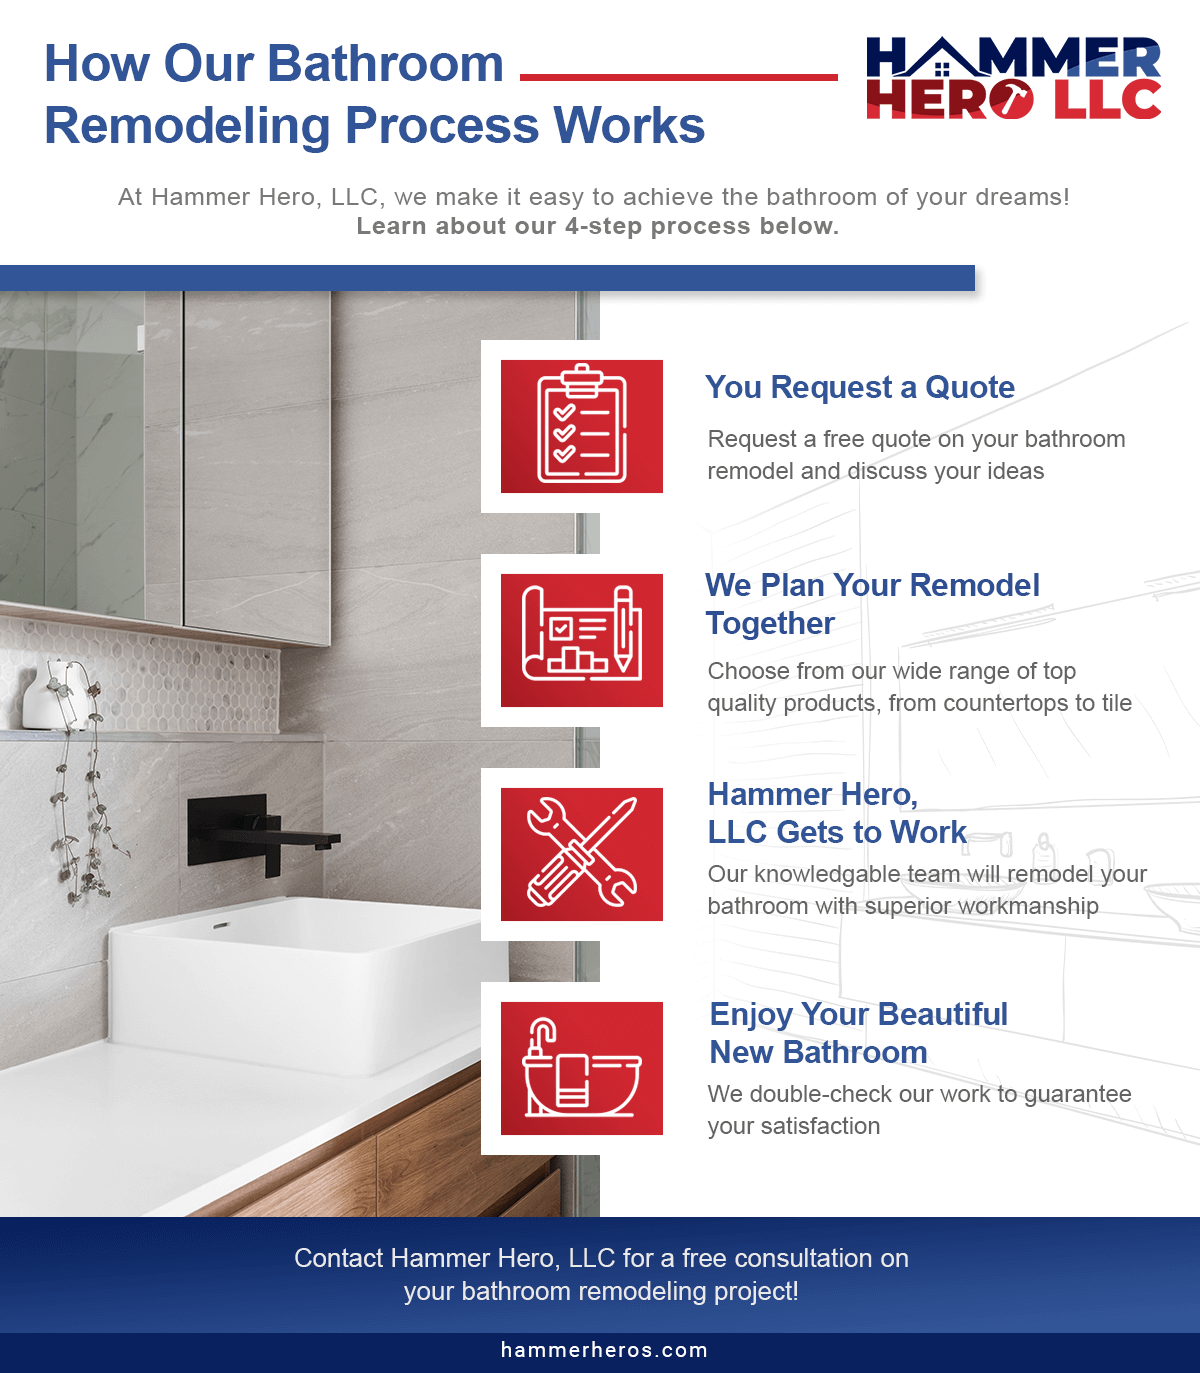 How Our Bathroom Remodeling Process Works (2).png